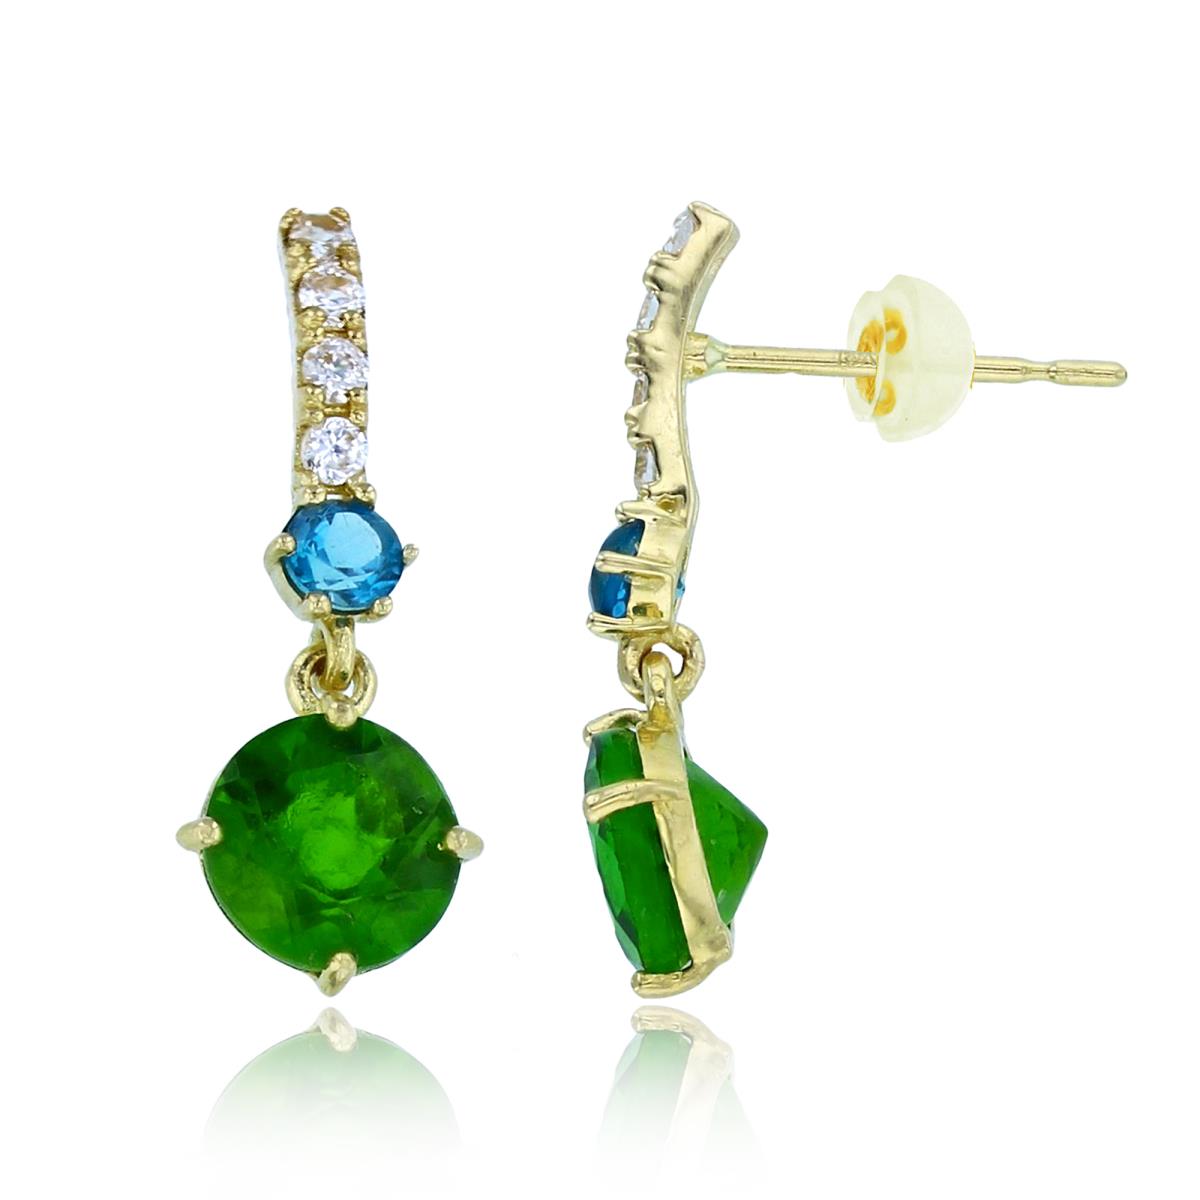 10K Yellow Gold 6mm Rnd Chrom Diopside/London Bl.Topaz & Wh.Zircon Dangling Earrings with Silicon Backs